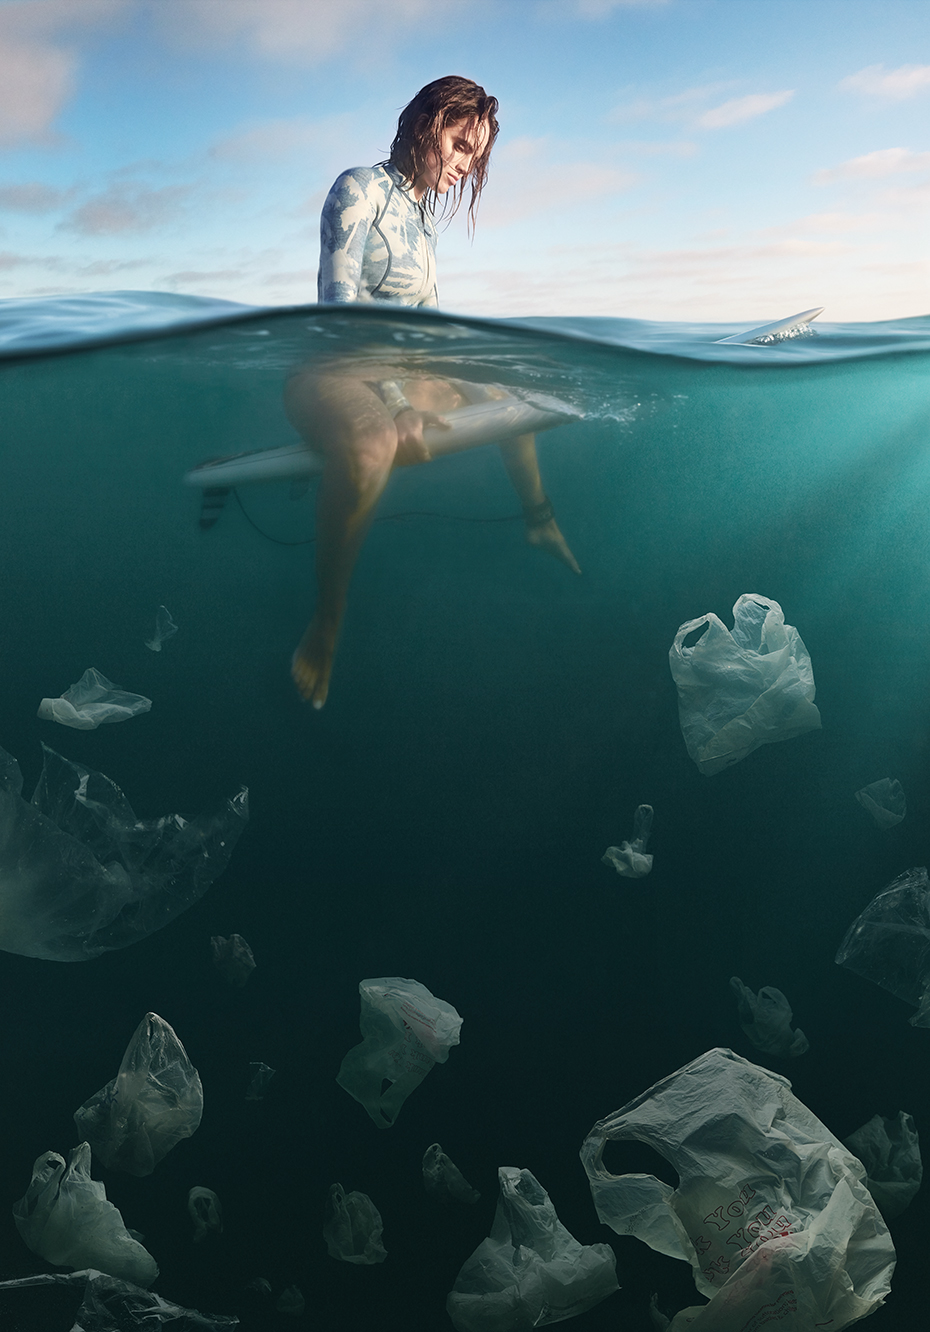 Art Direction & Digital Photography: Plastic Surf by Weston Fuller